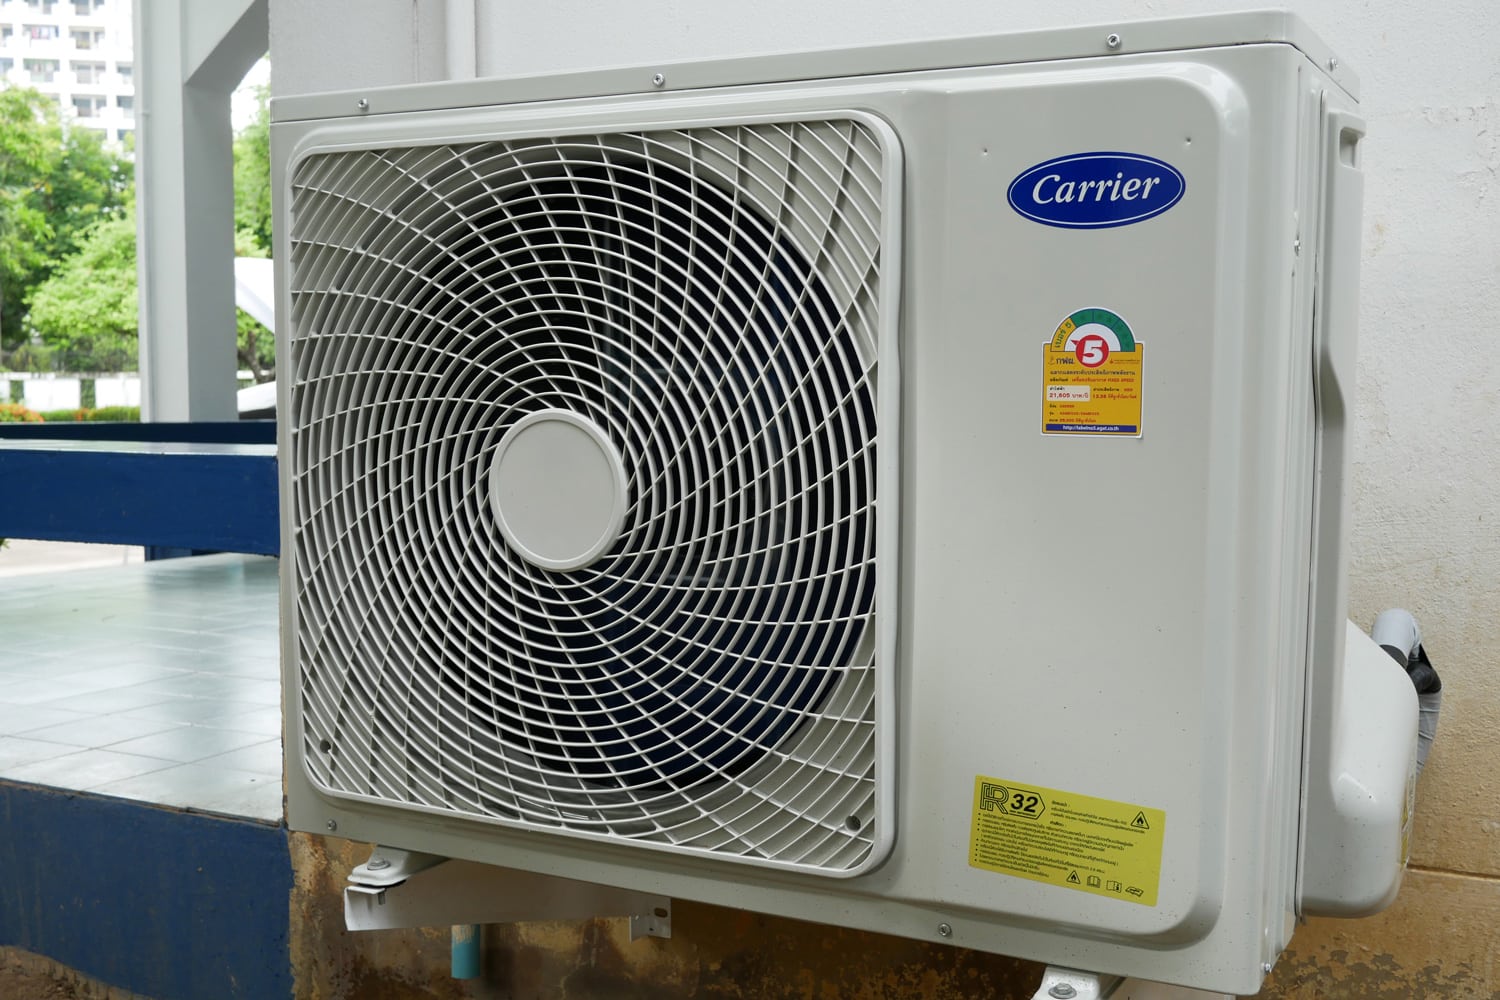 Carrier Air conditioner unit at office.